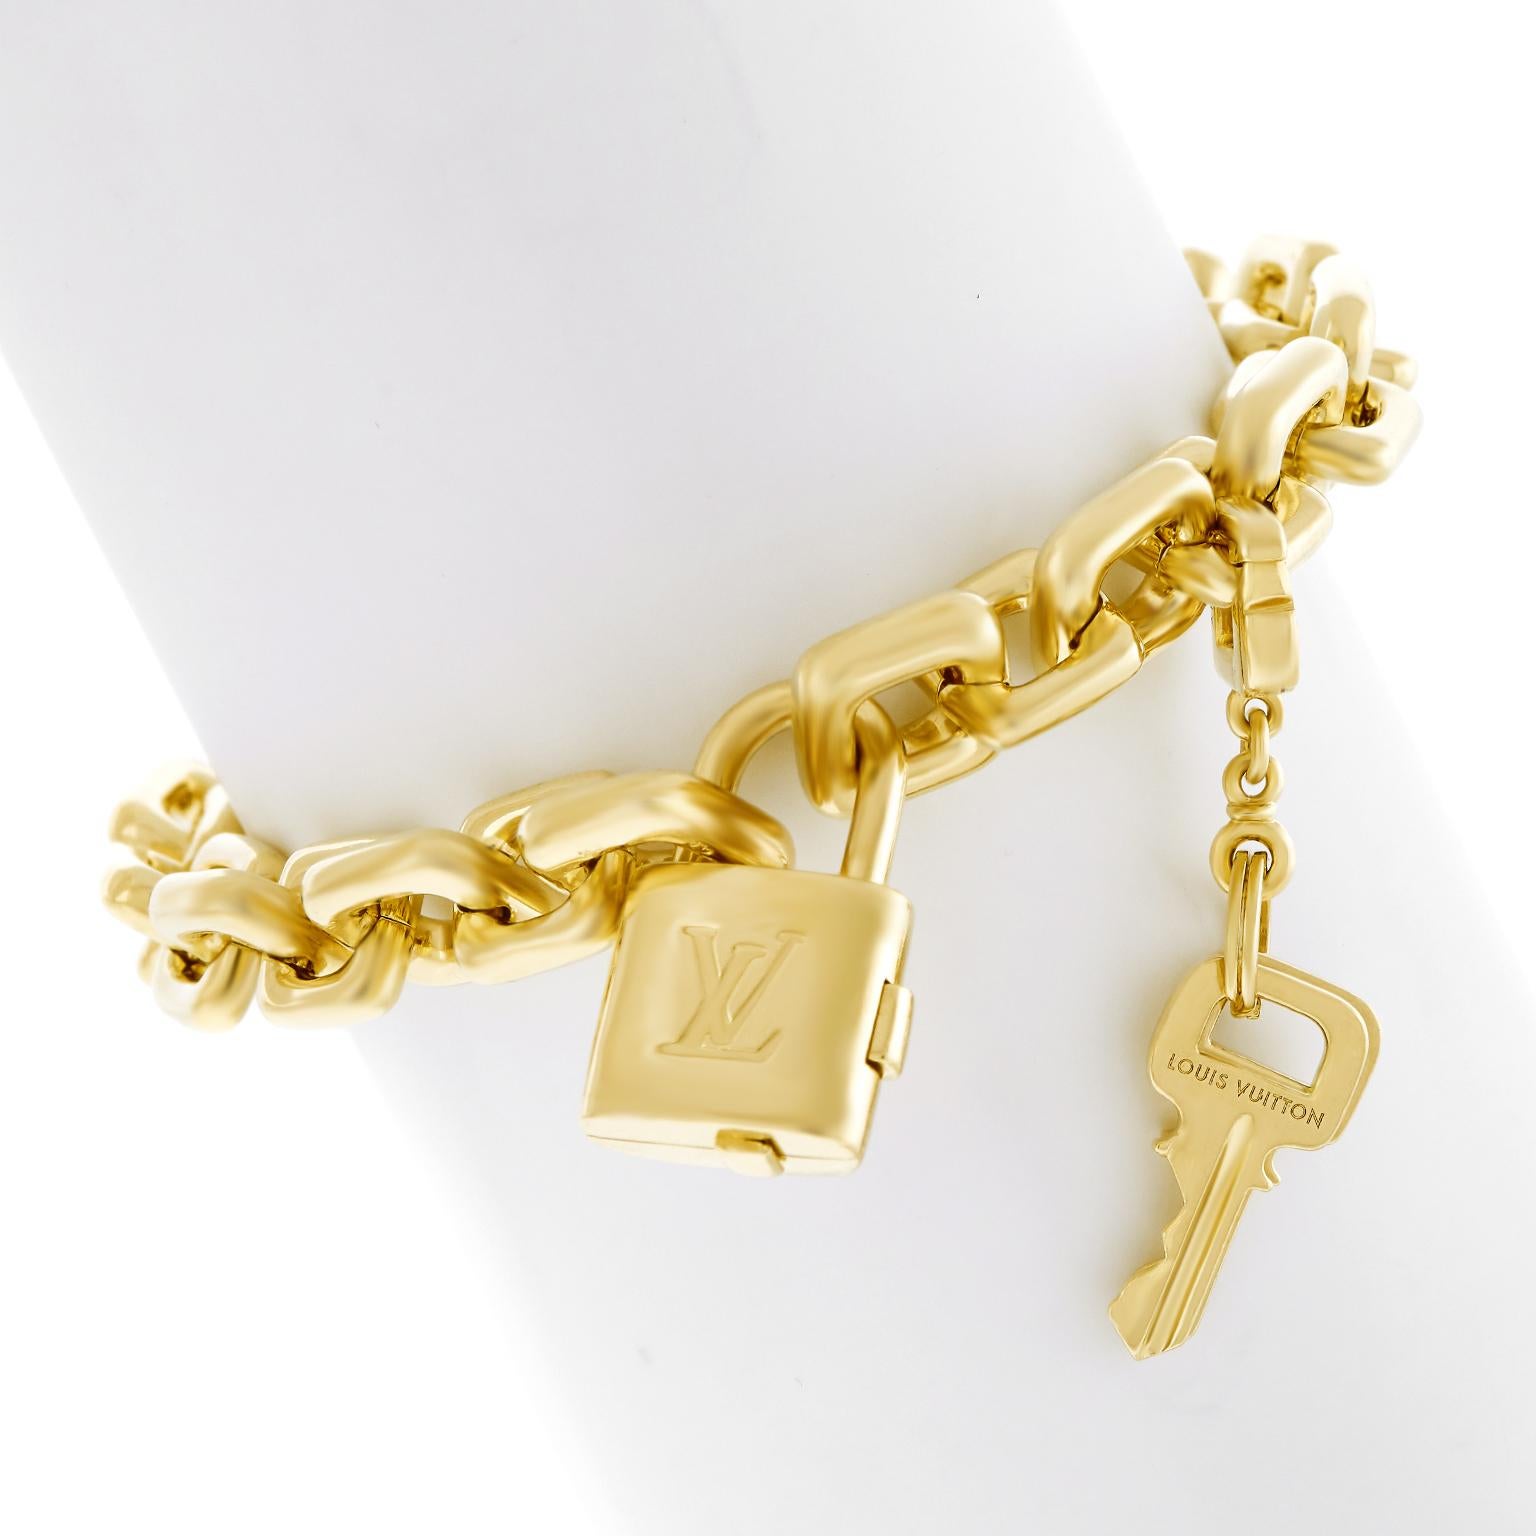 Louis Vuitton Gold Charm Bracelet with Lock and Keys 1